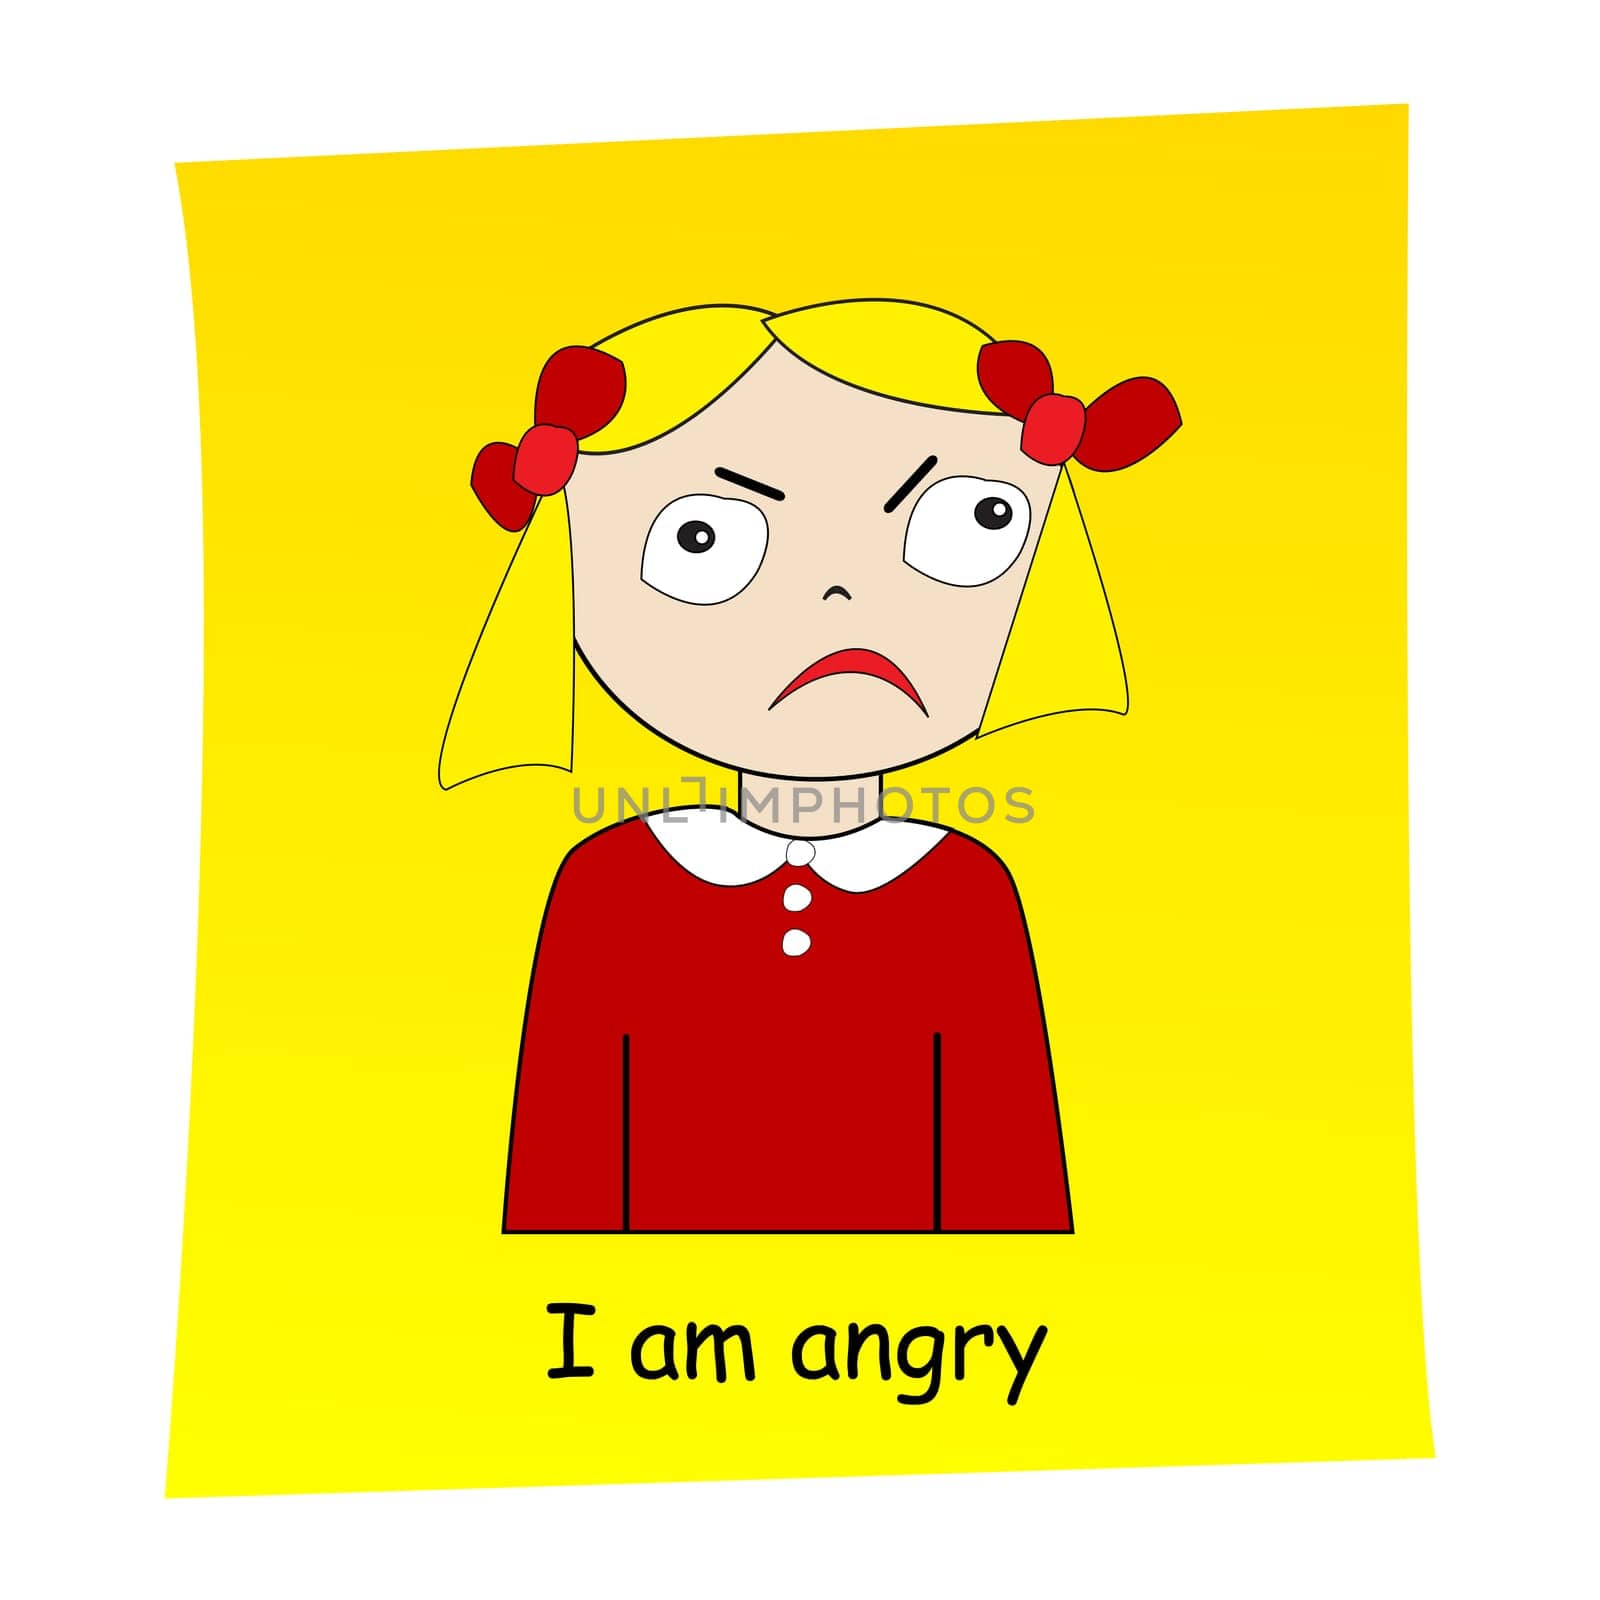 I am angry concept. Cartoon hand drawn girl with angry expression by hibrida13